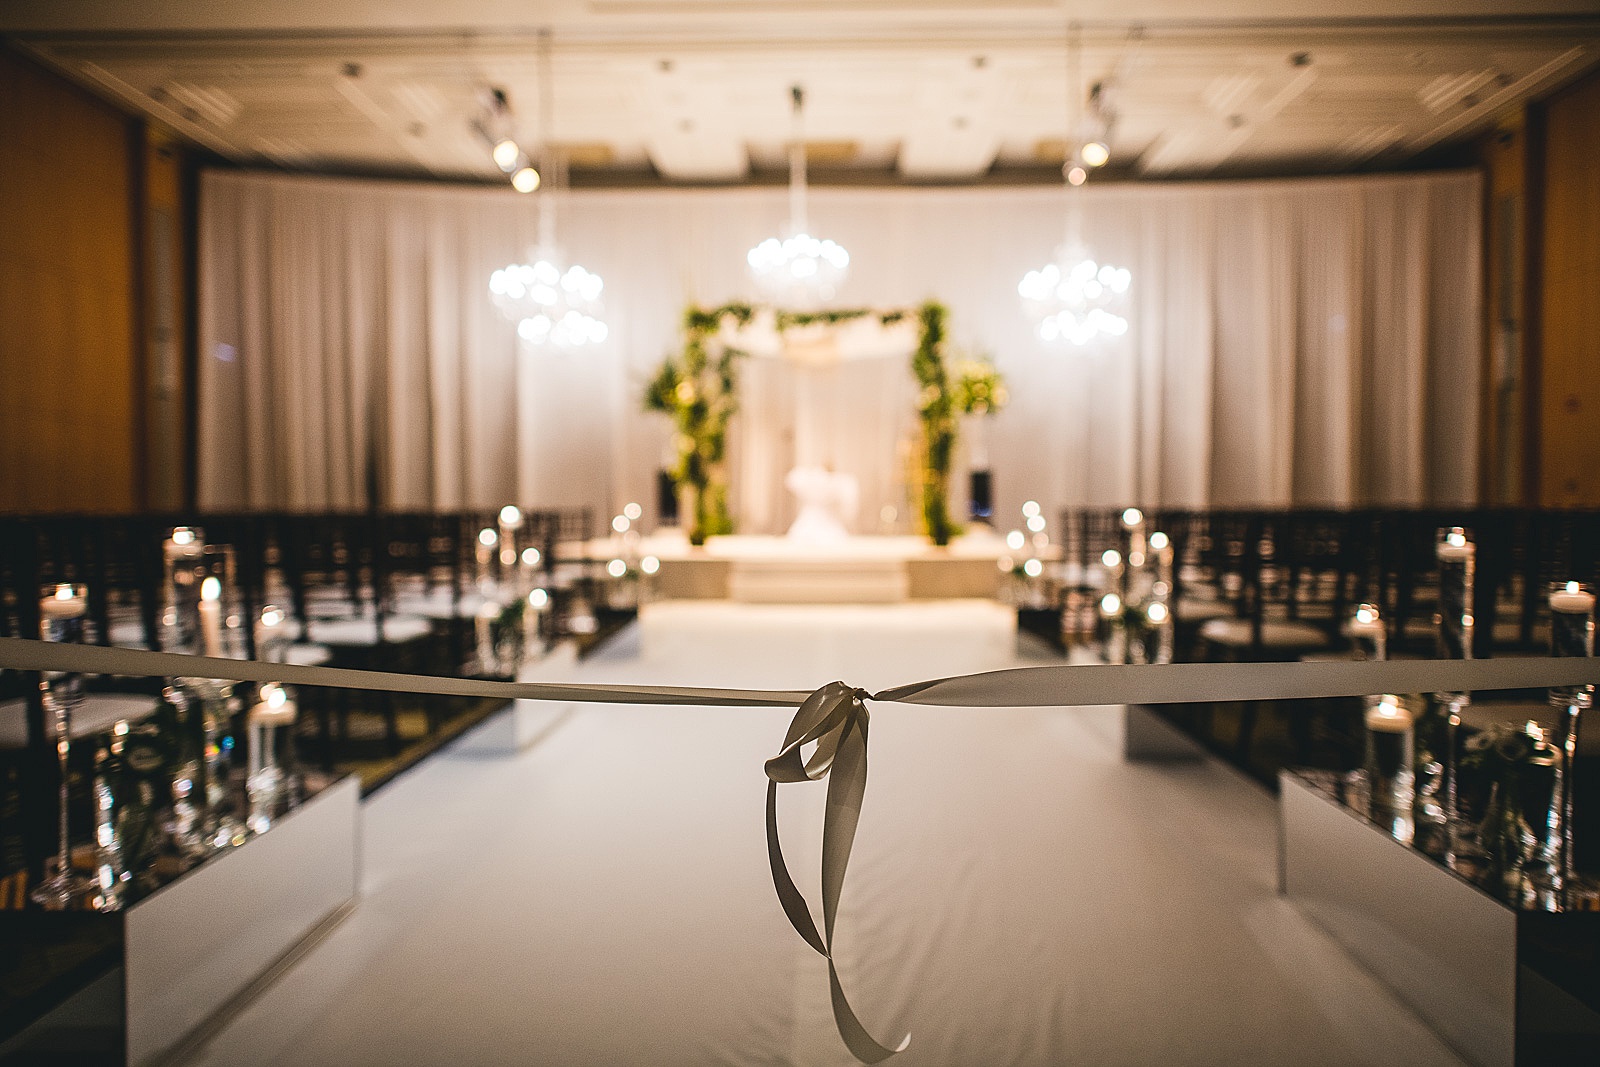 33 gorgeous ceremony details - Susie + Eric's Jewish Wedding at the Peninsula Hotel in Chicago